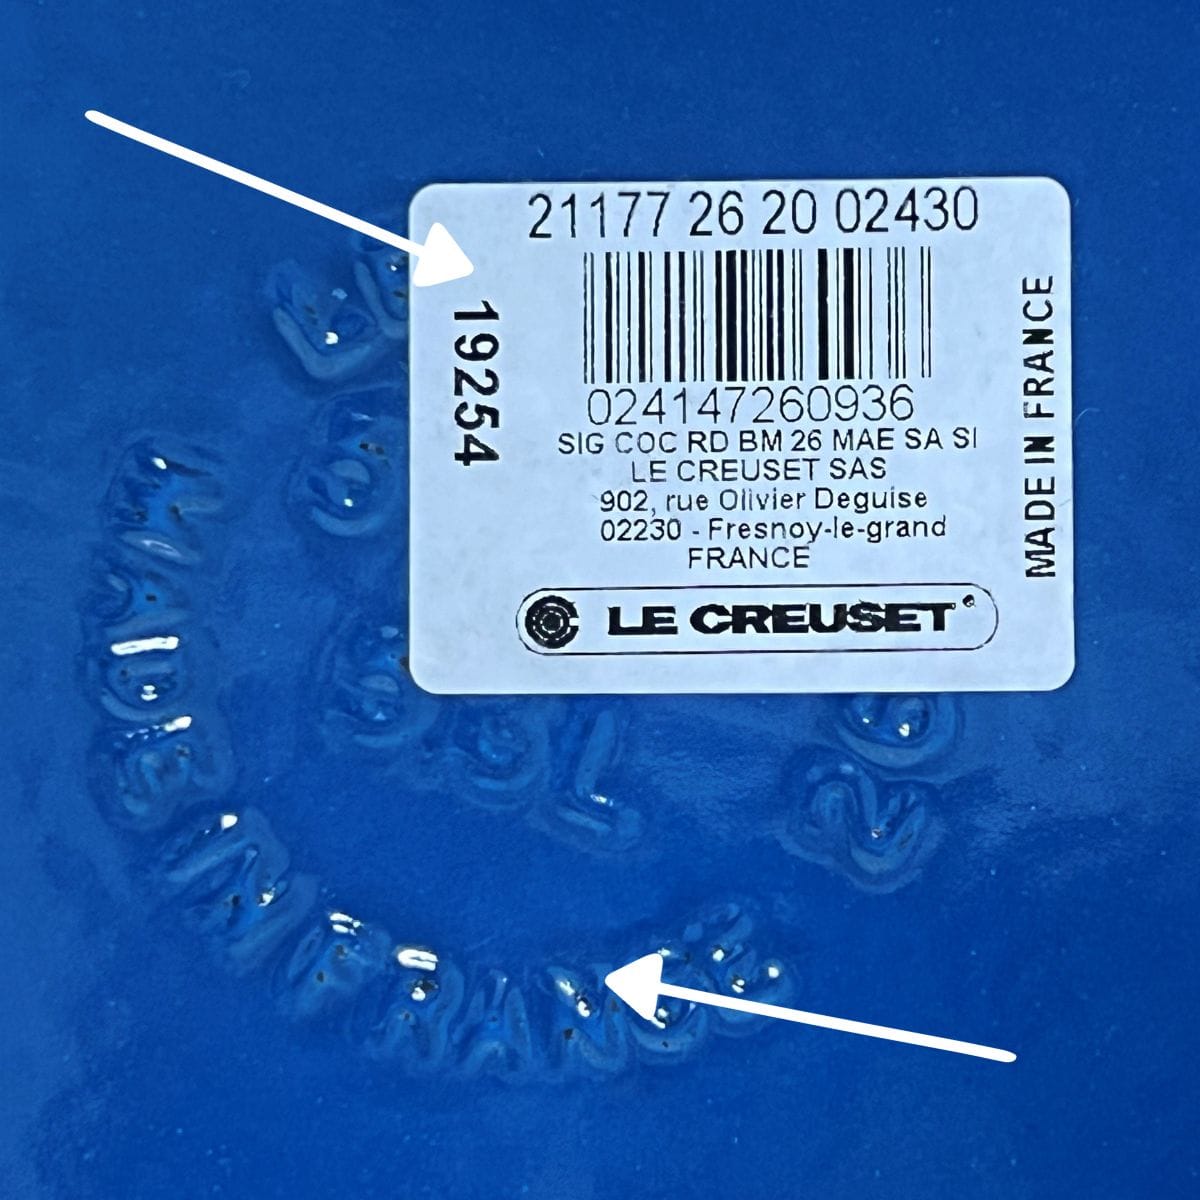 le creuset made in france sticker